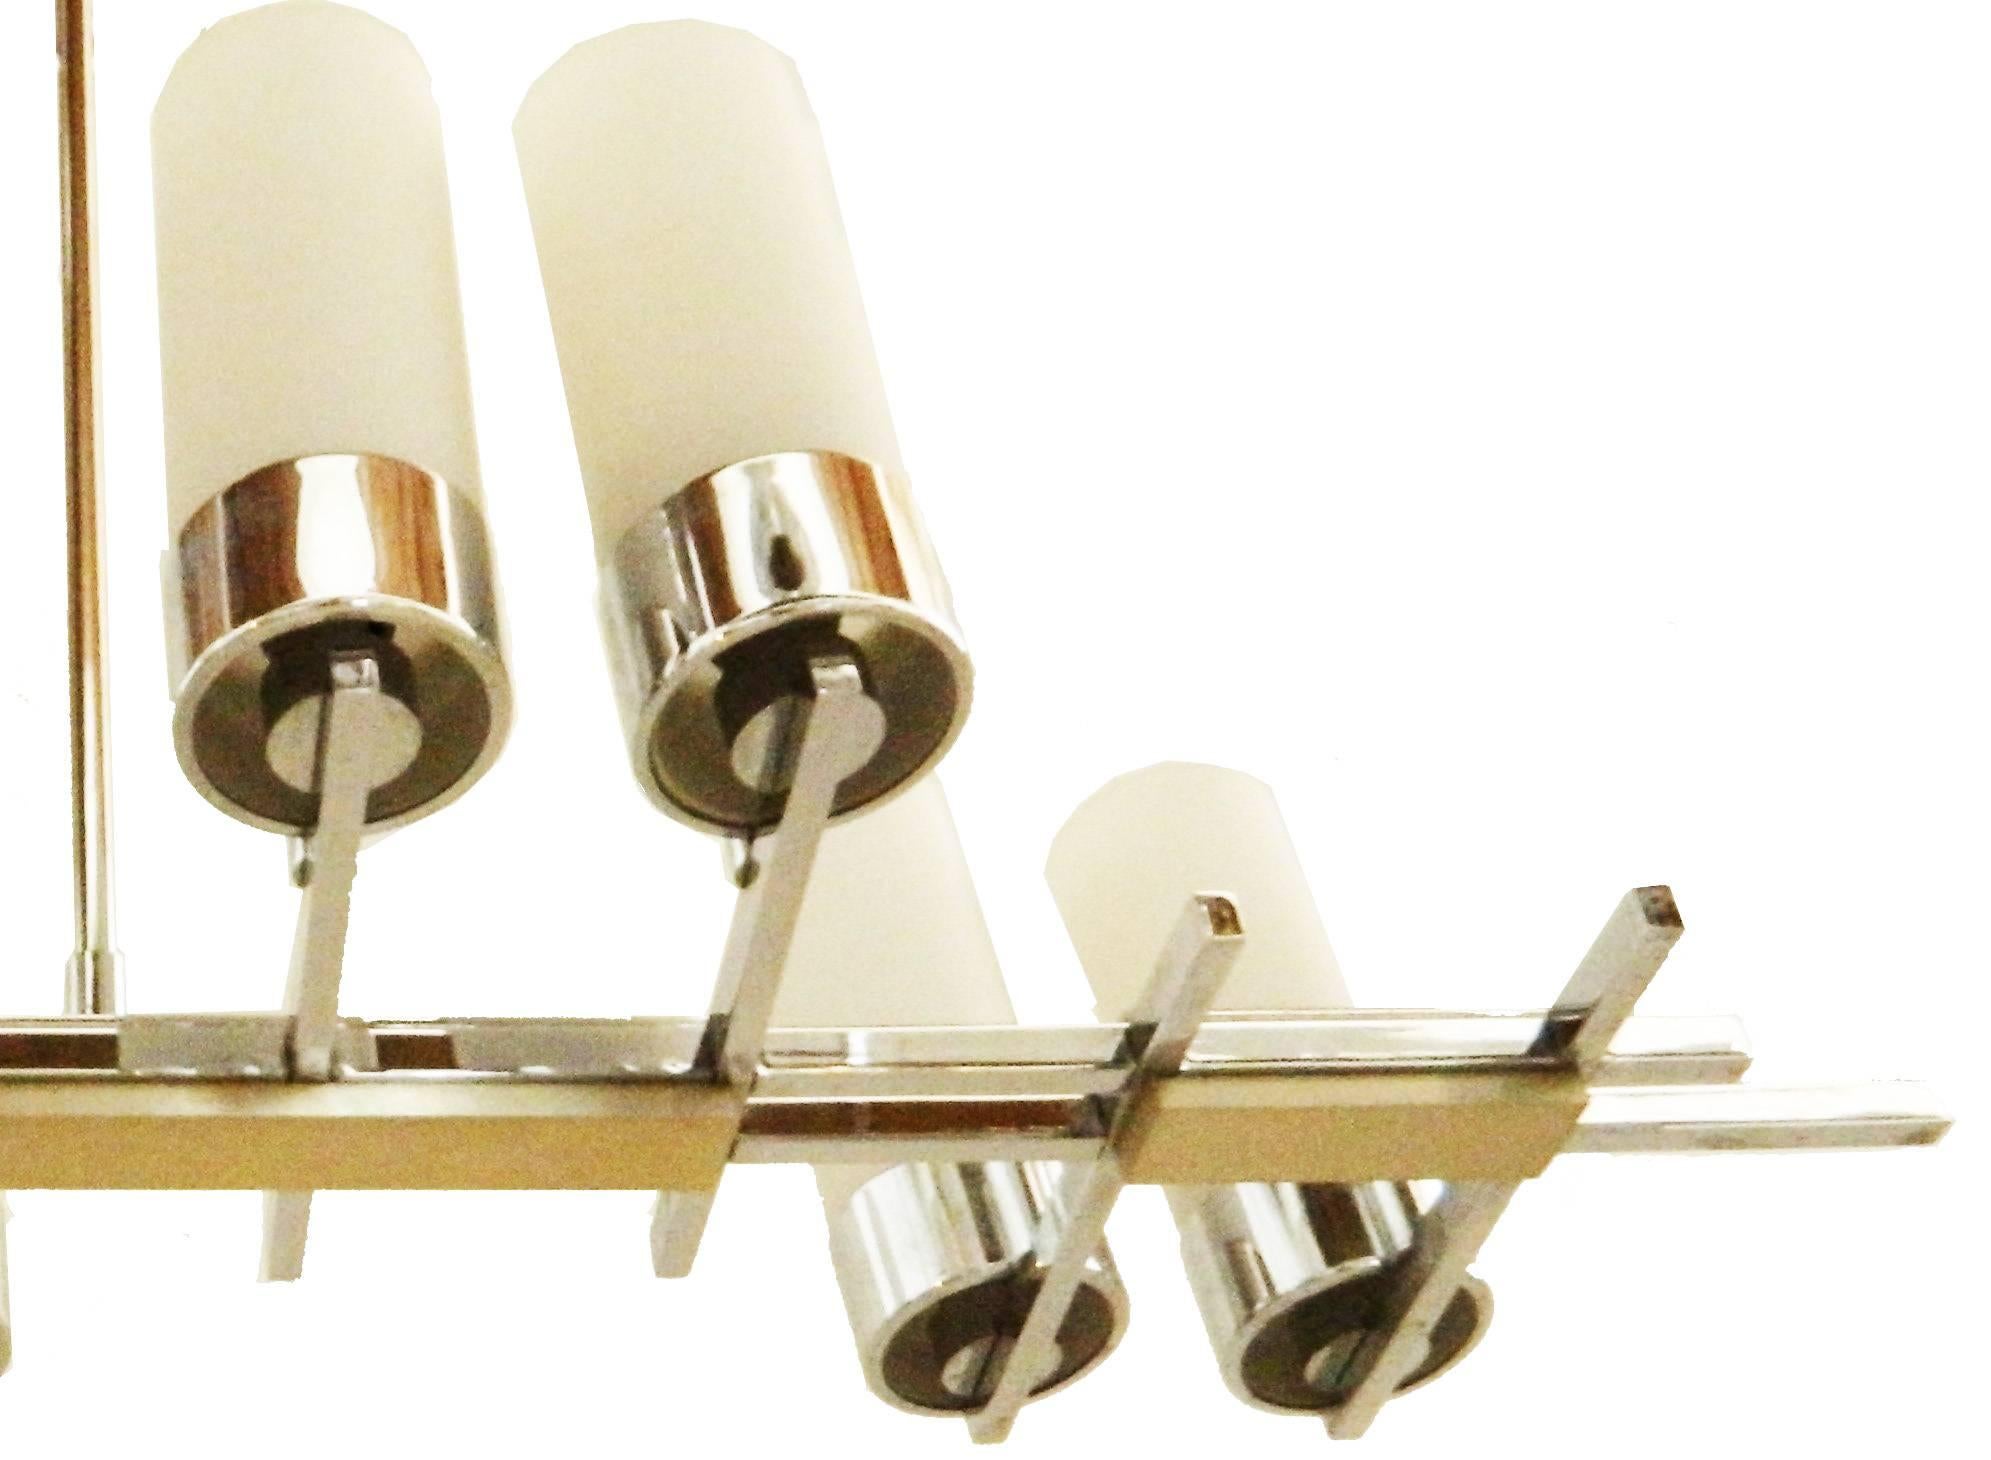 Very nice Modernist Jacques Adnet chandelier, Finished in chrome and with 8 original handmade Antique White Opaline shades.
US Rewiring and takes 8 light bulbs with max. 40 watts.
French Mid-Century Modern Light Fixture for a bright light above a